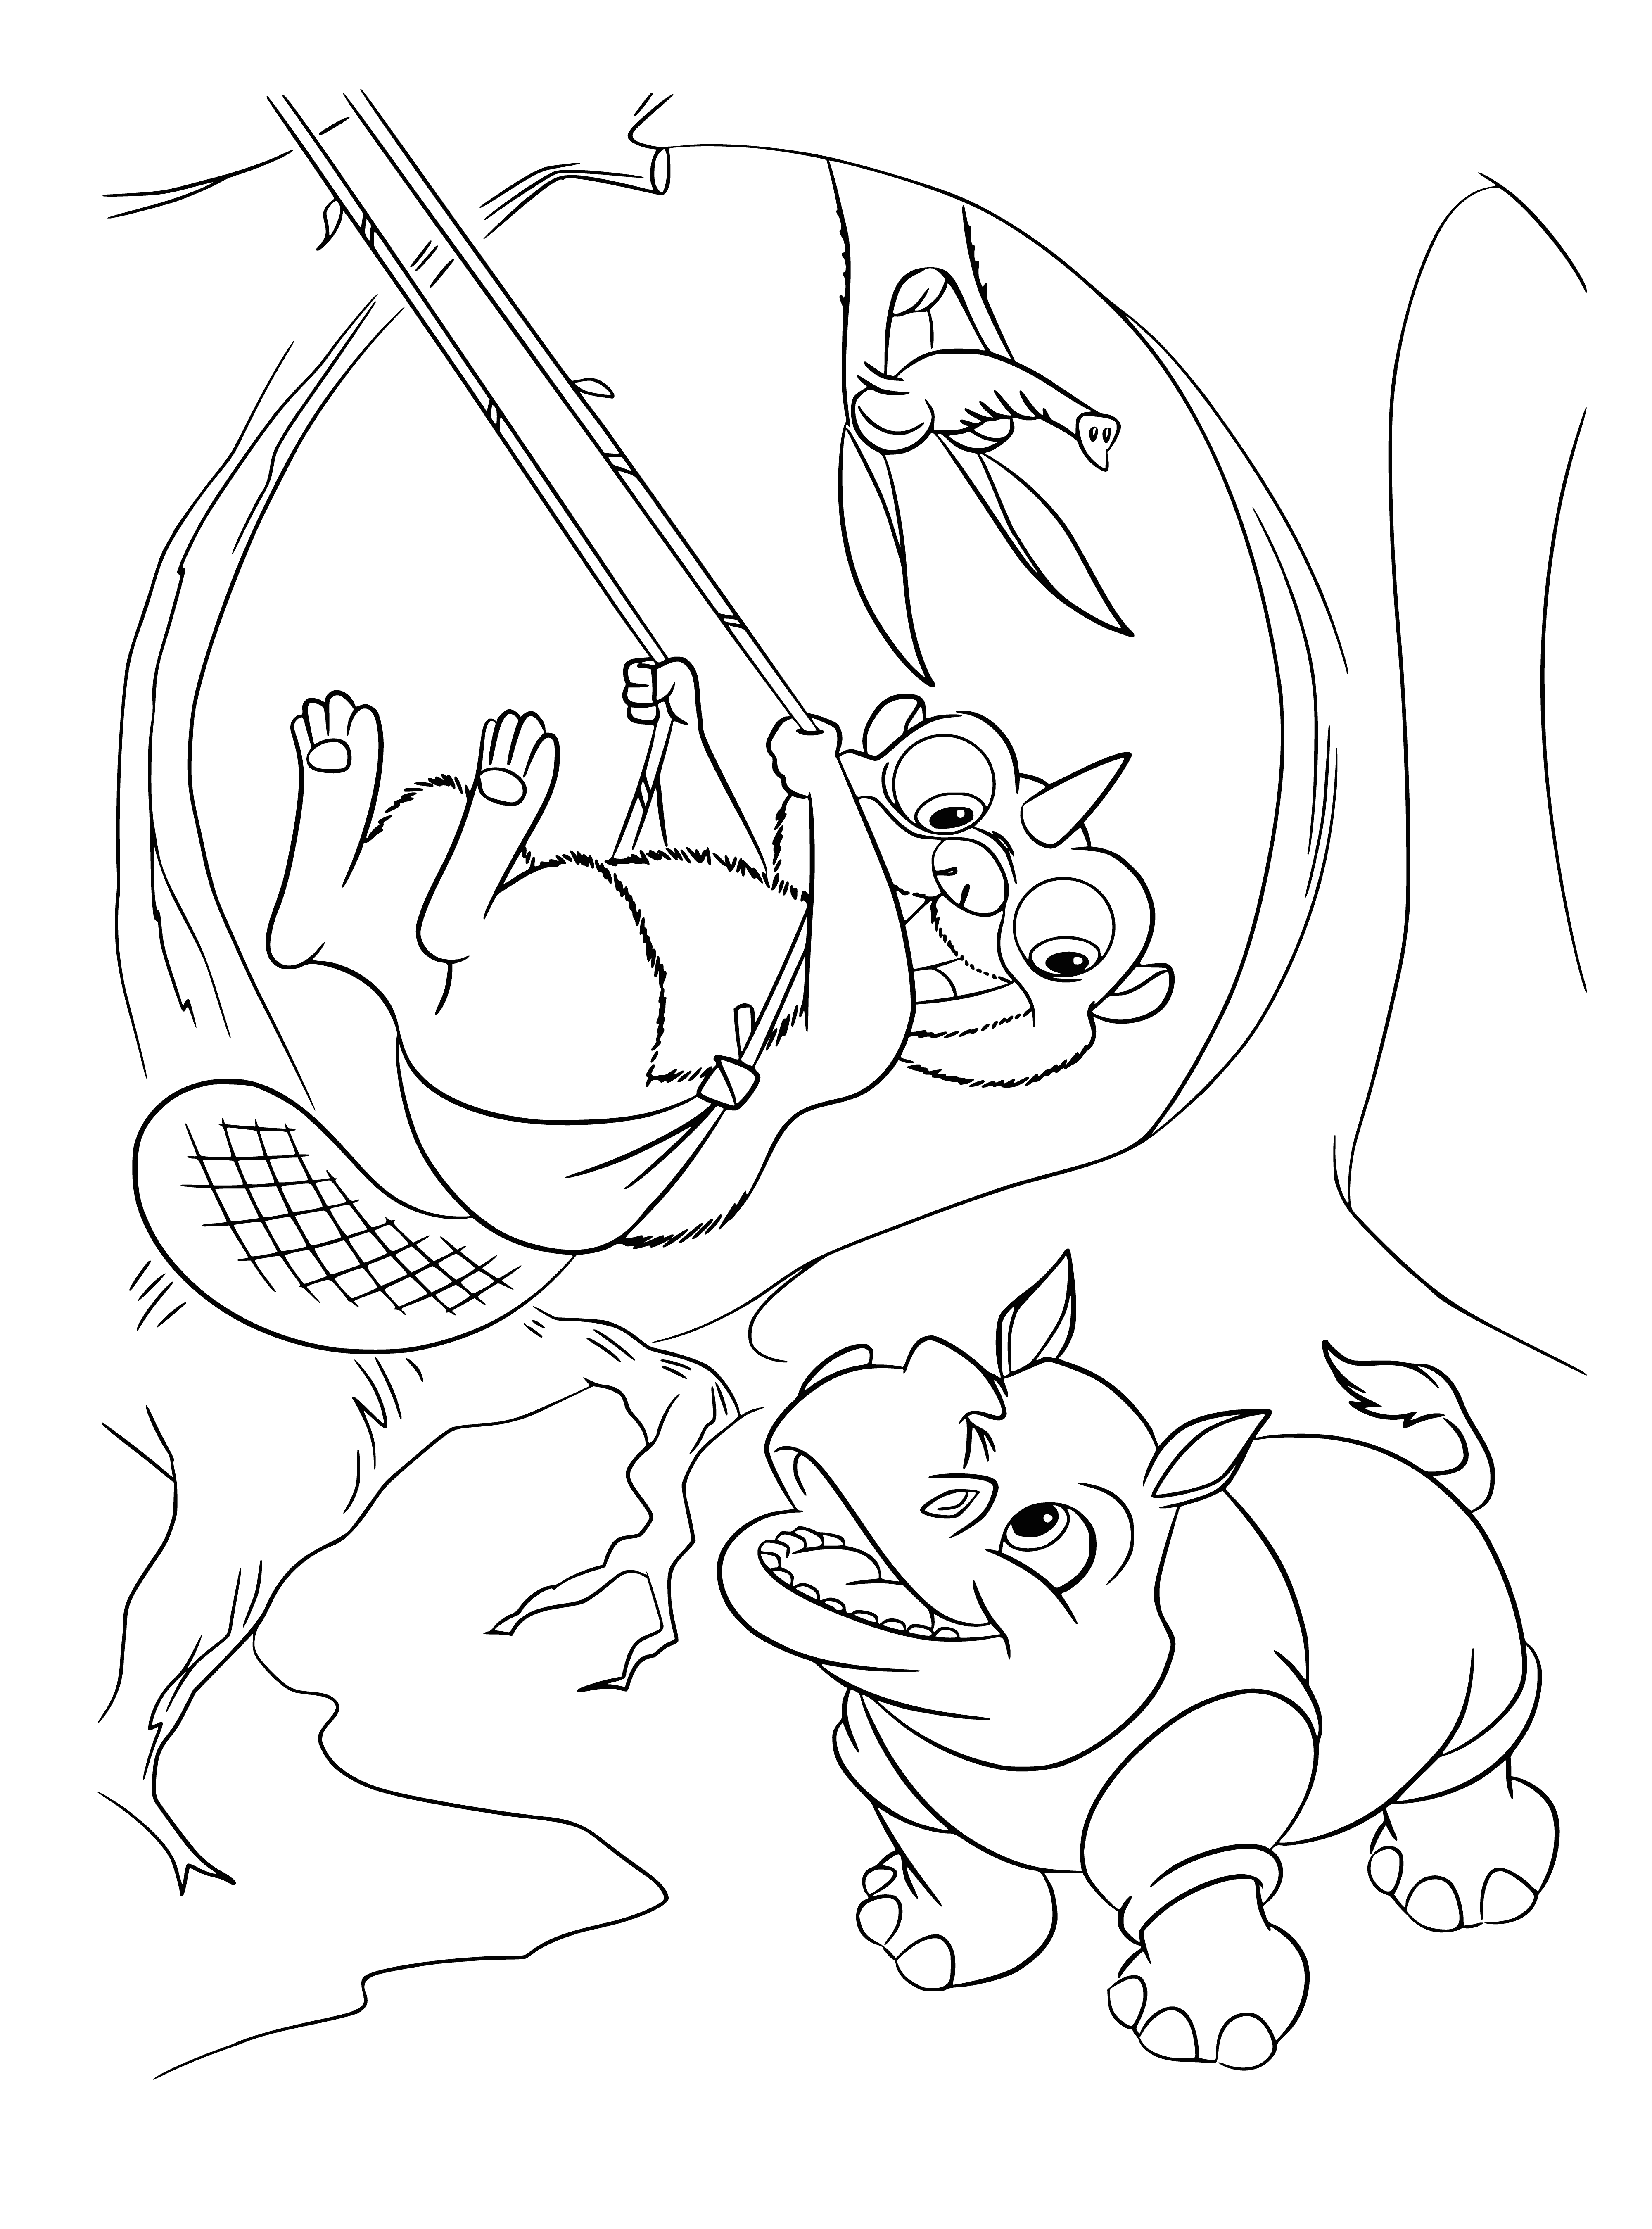 Playground coloring page